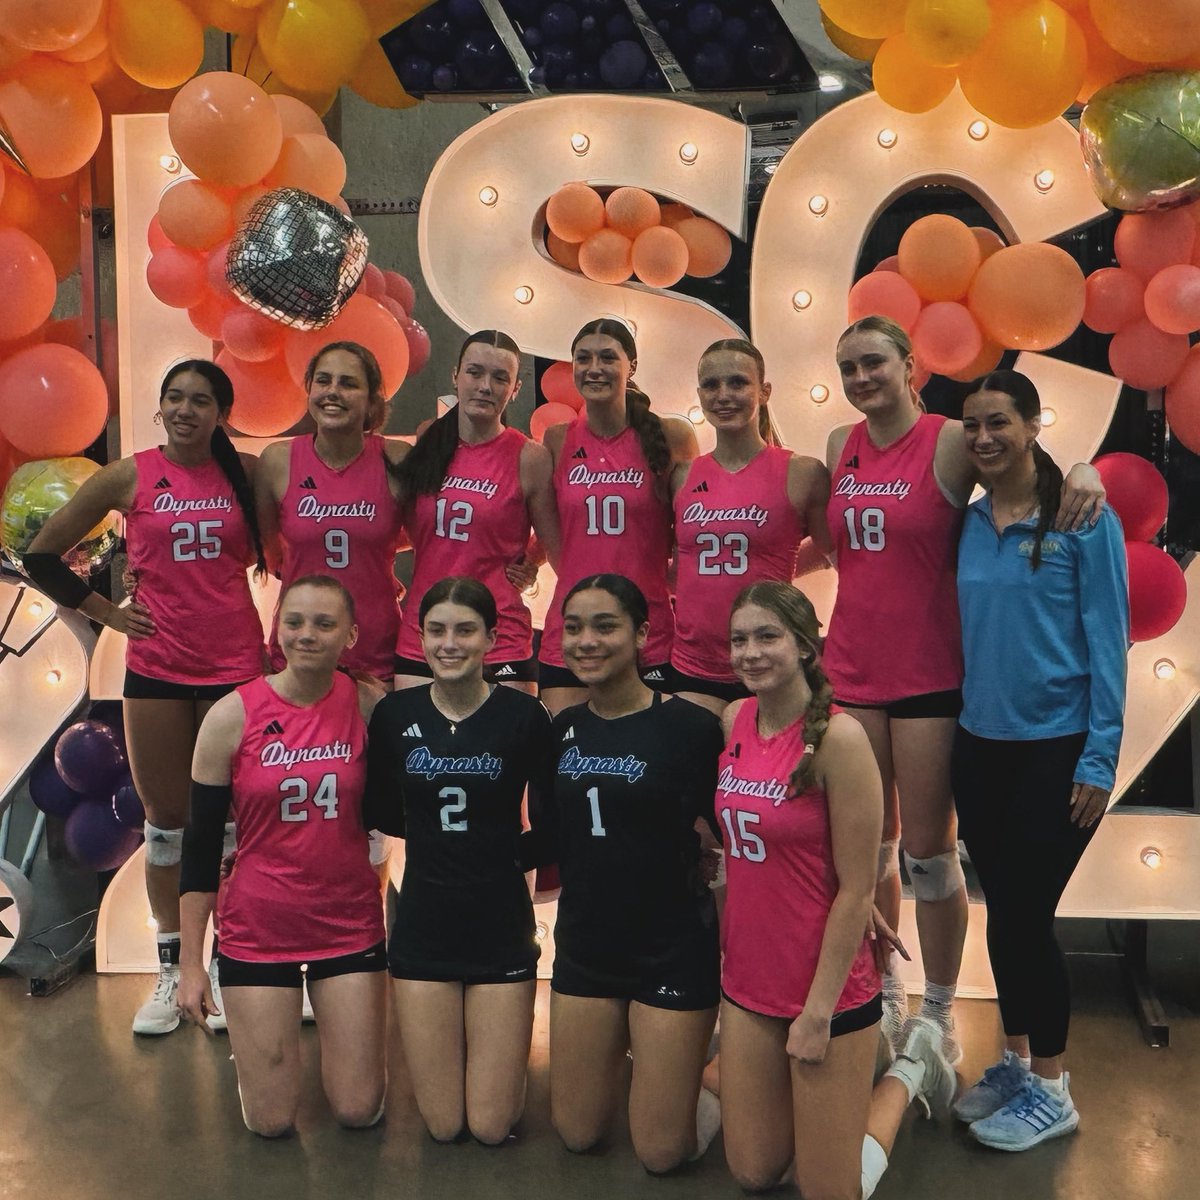 🔥MOVIN’ UP AT LONE STAR🔥 Shout out to the athletes, coaches, and families on Dynasty 15 Black, 16 Black, and 17 Black for moving one step closer to Open Bids at Lone Star! Good luck to 16 Blue, 16 Gold, and 16 Grey in the PM wave…💙🖤 #BidSeason💪🏾